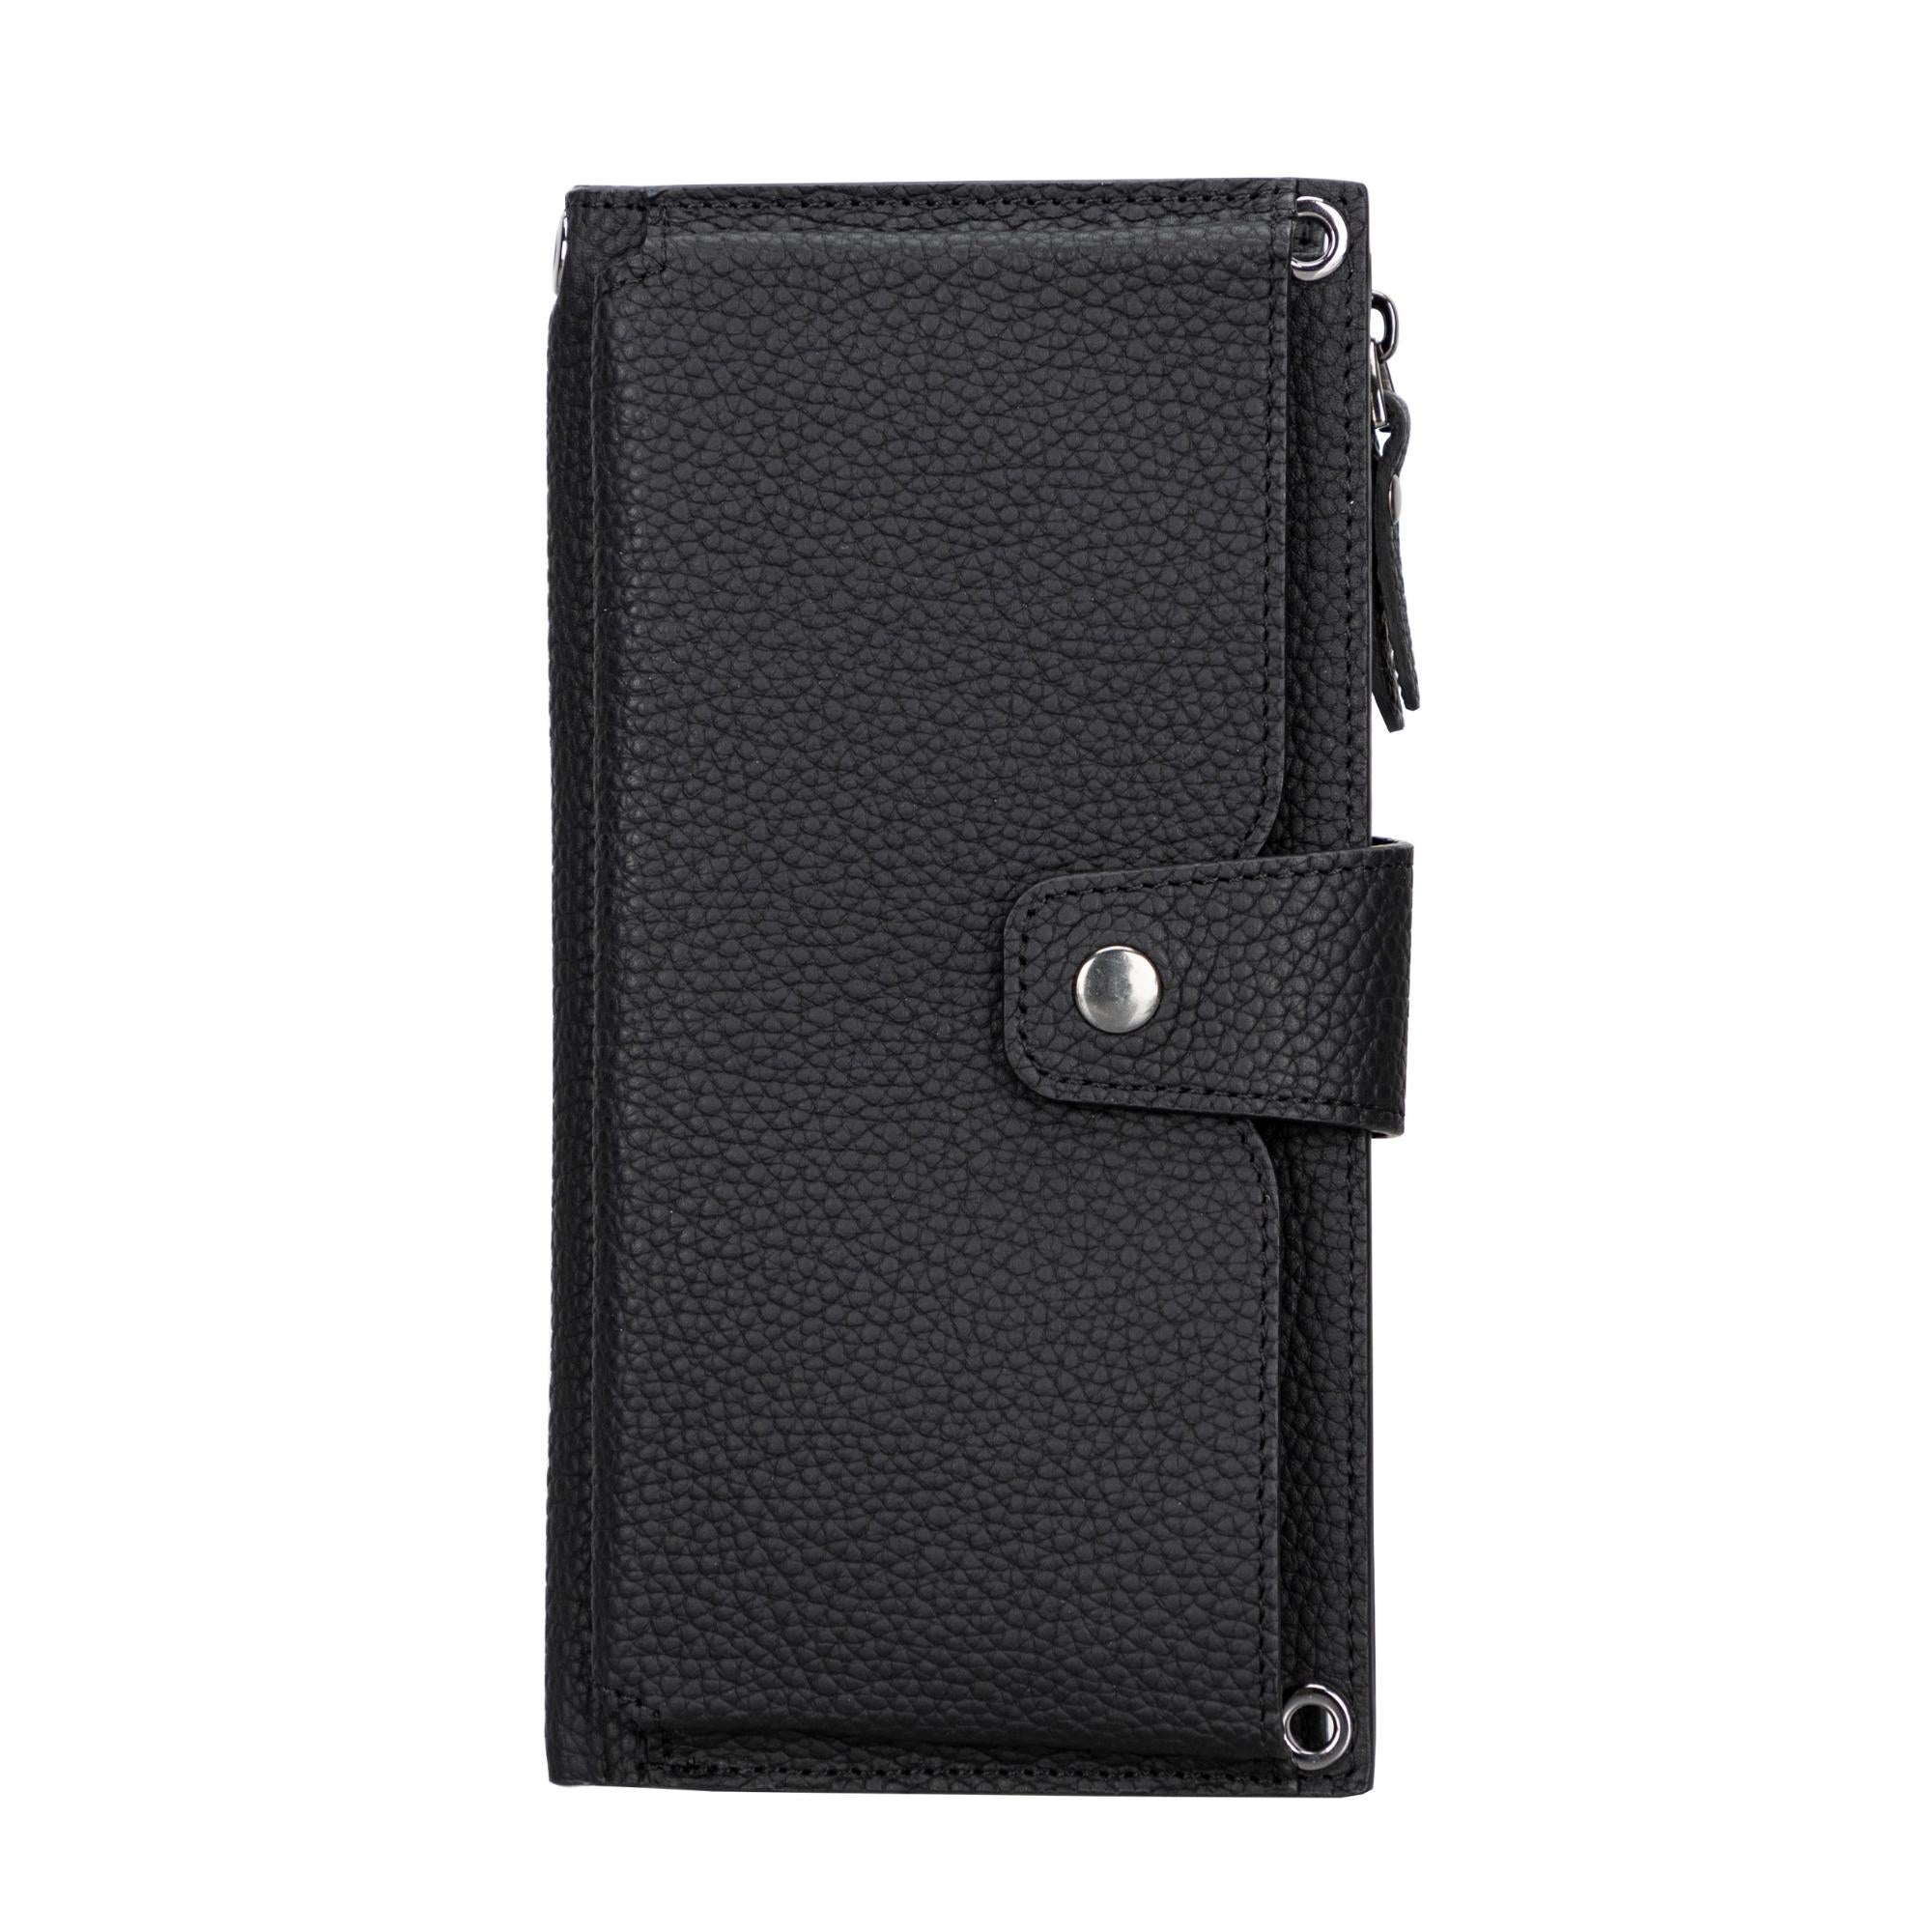 Kaycee Leather Women's Cell Phone Wallet with Strap - Black - 6.9" - TORONATA